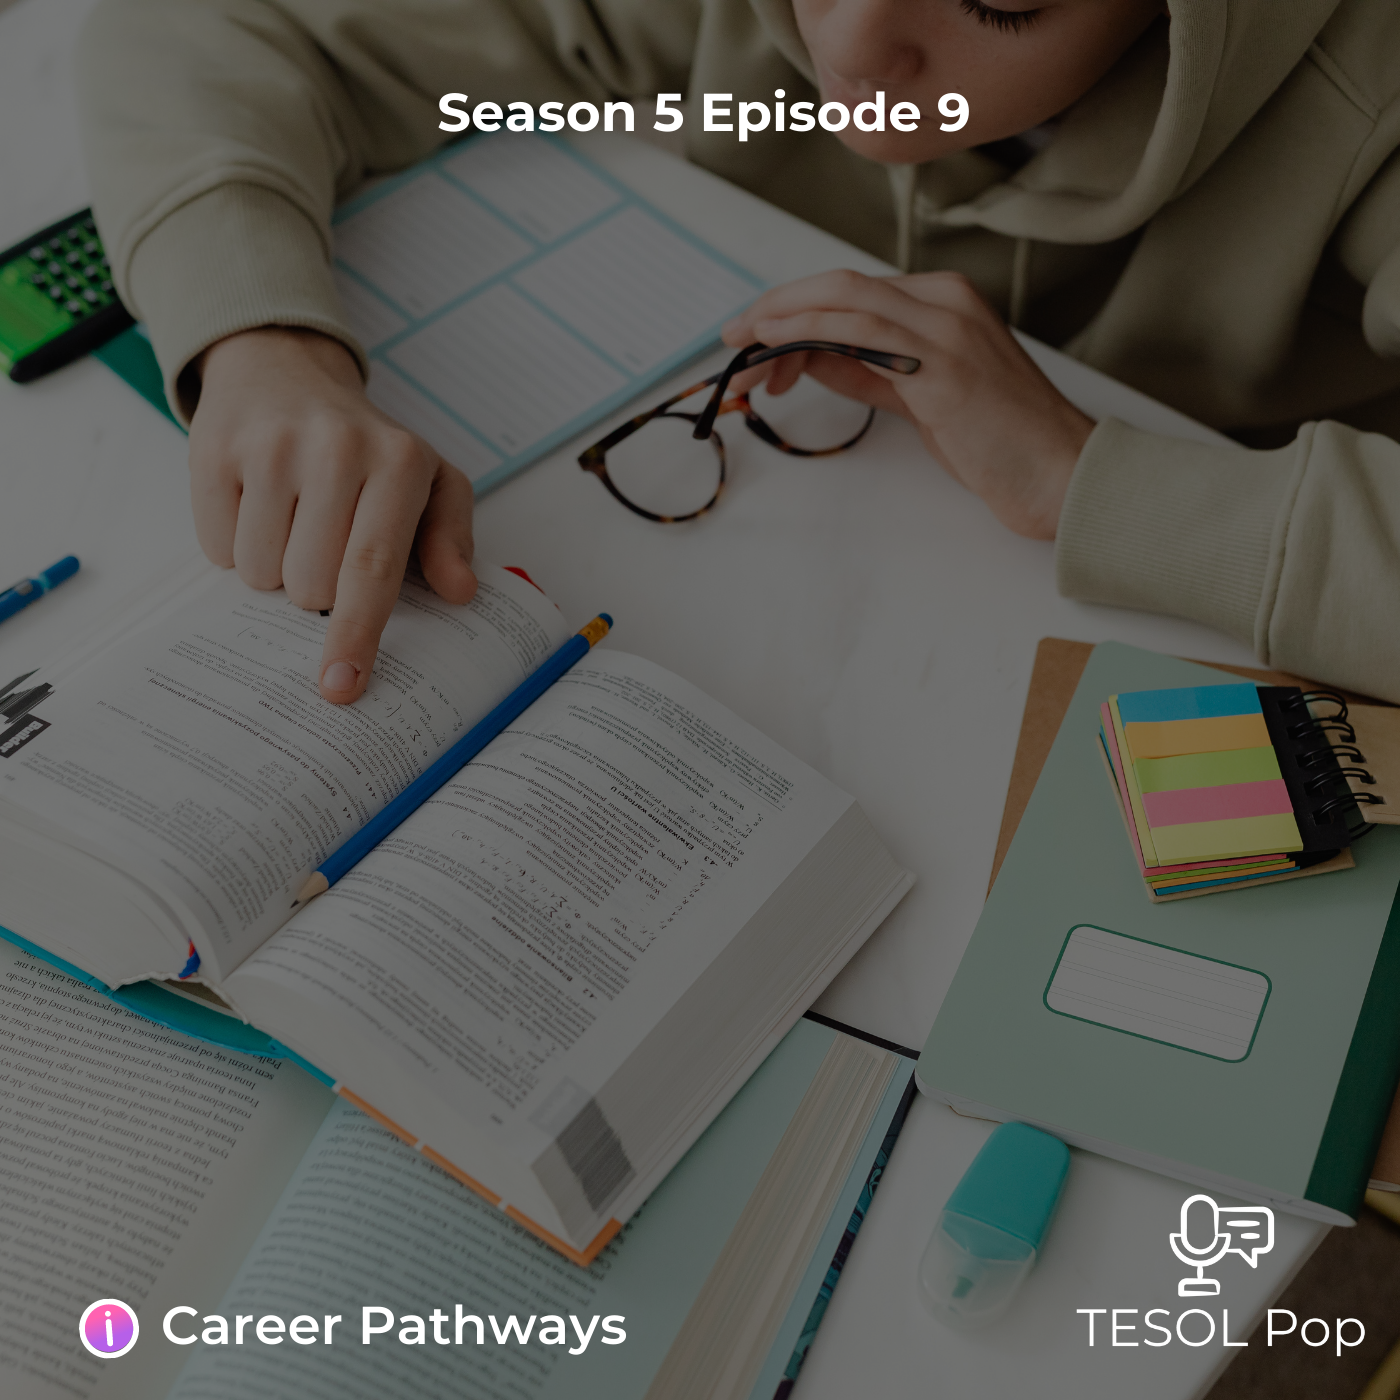 S5E9: Is A Master's Degree in TESOL Worth It? with Thu Thu Naing